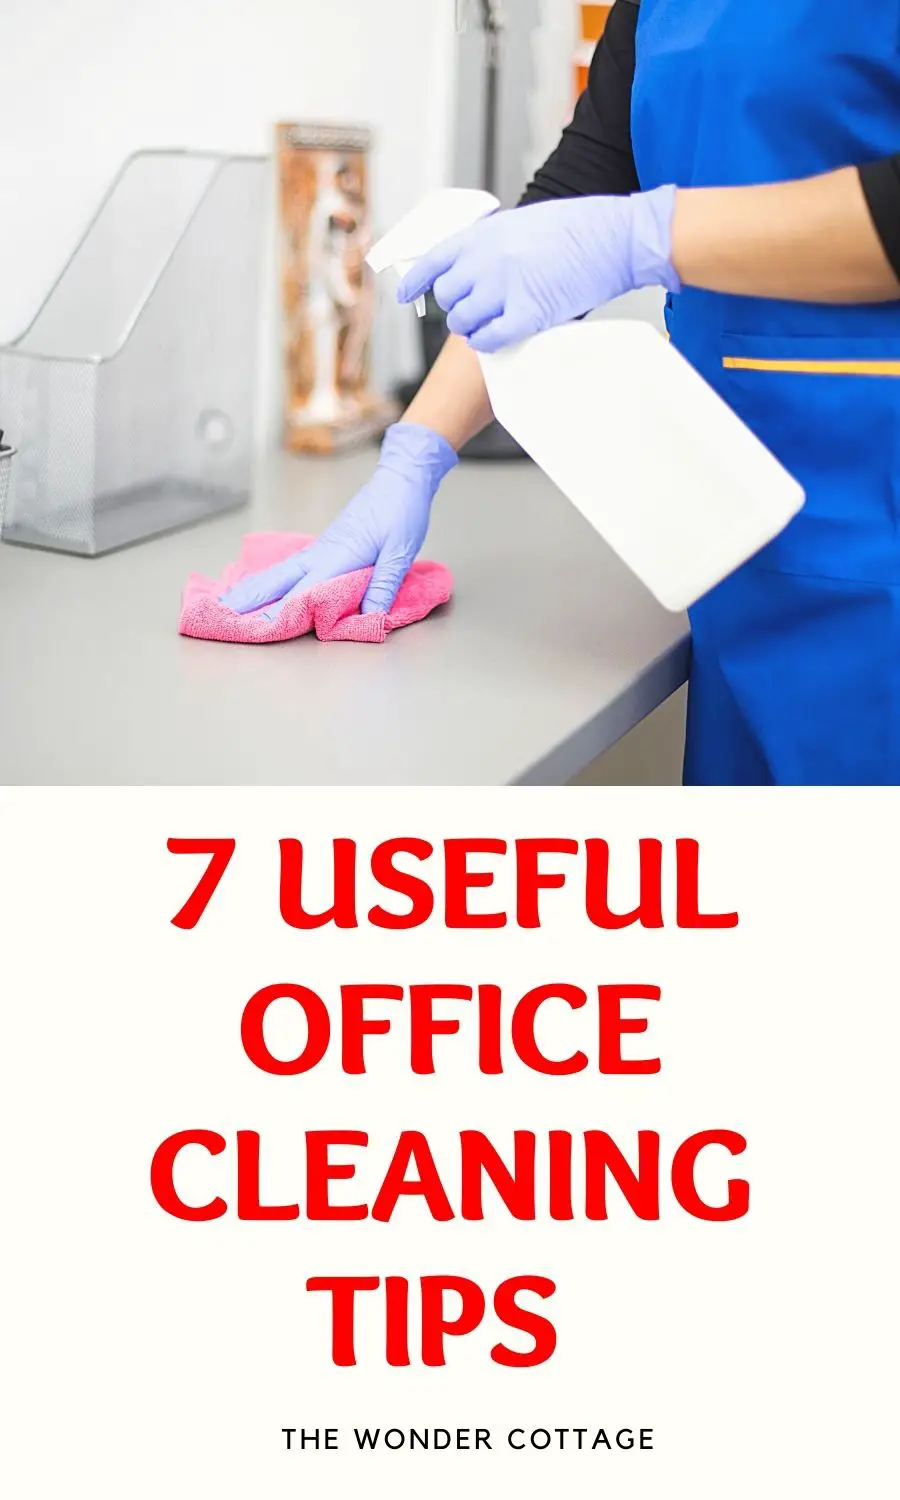 7 Useful Office Cleaning Tips That You Should Know